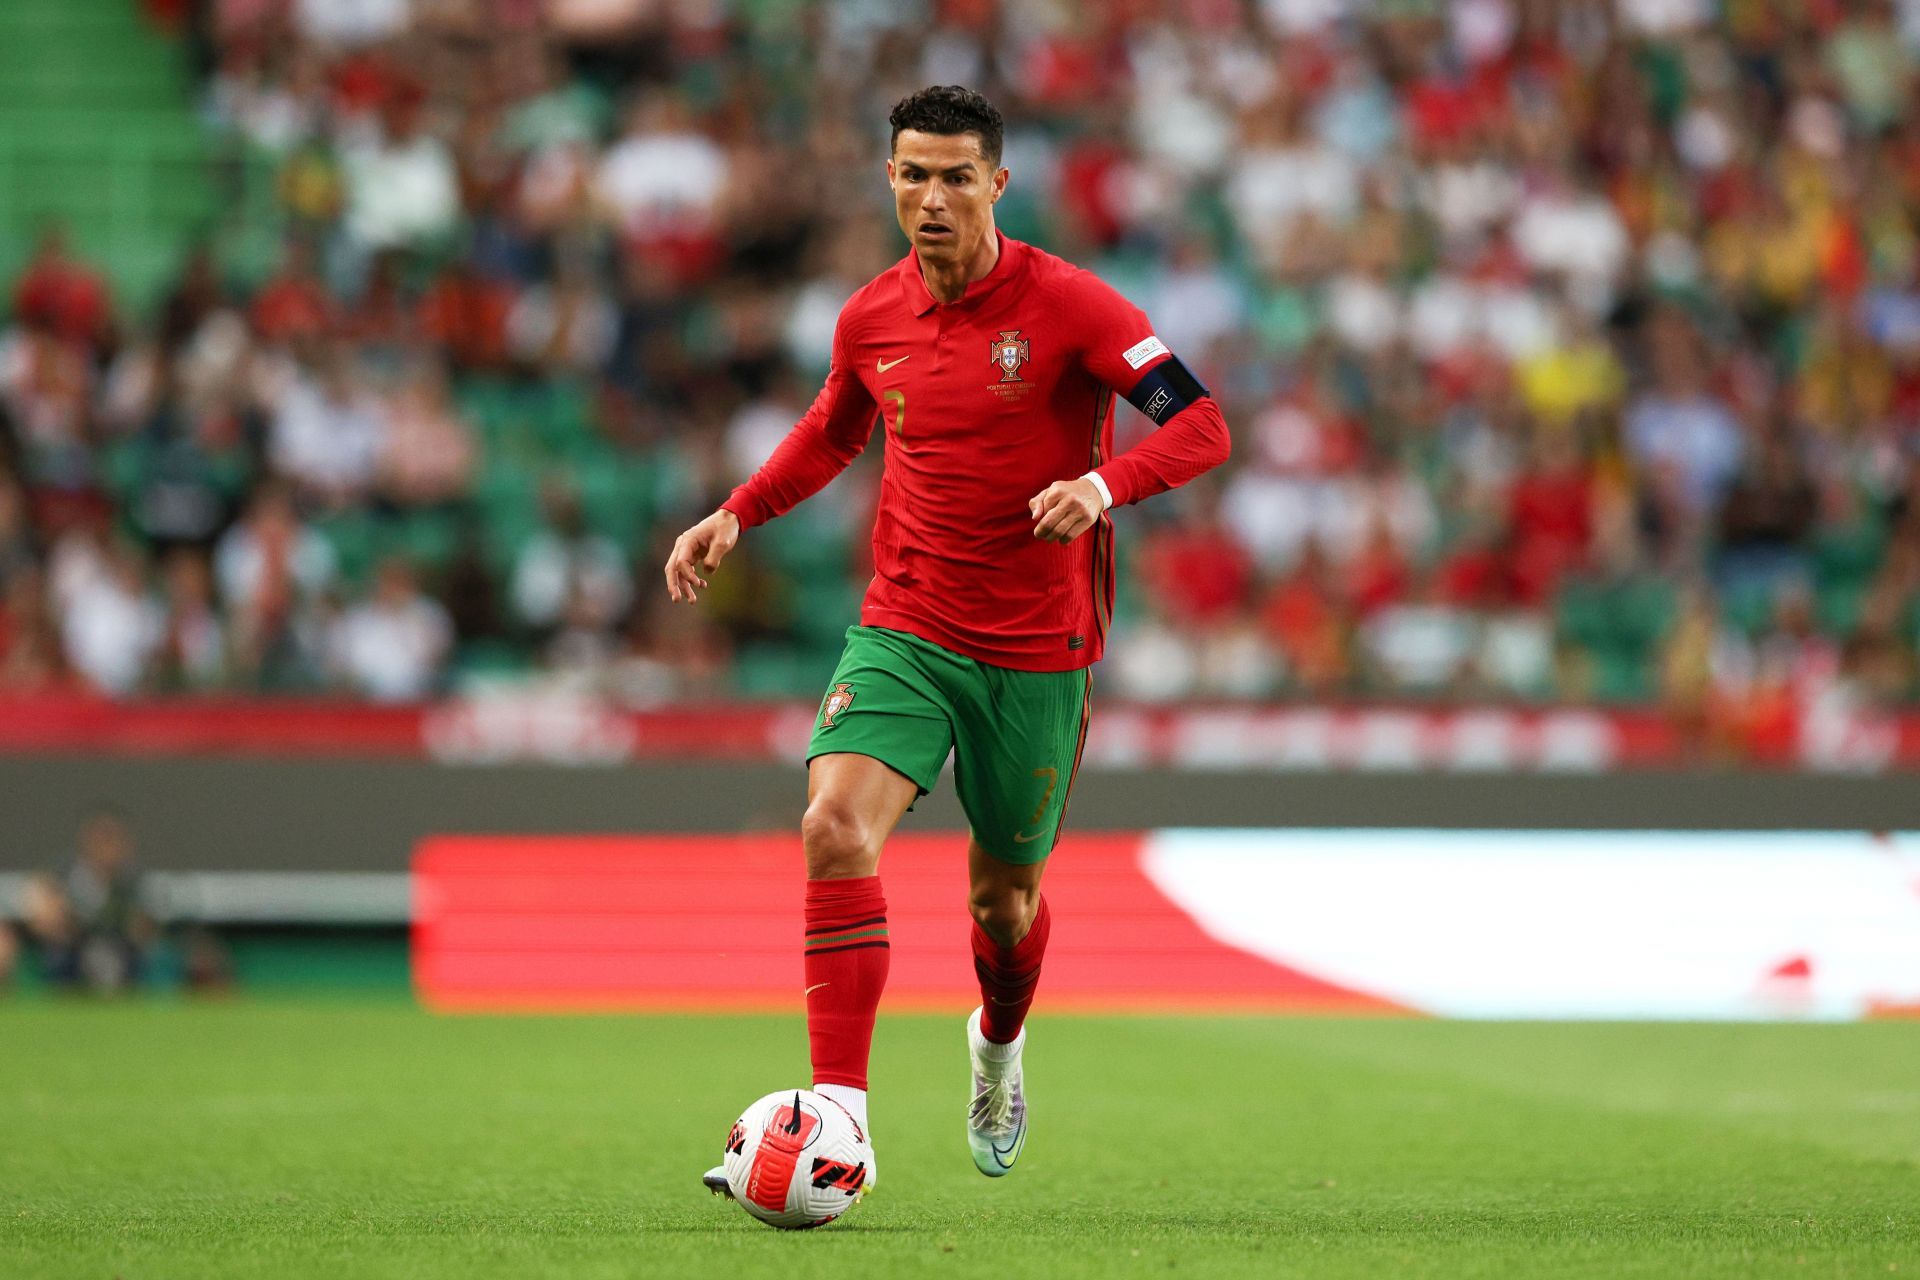 Cristiano Ronaldo is missing from the pre-season tour due to personal reasons.